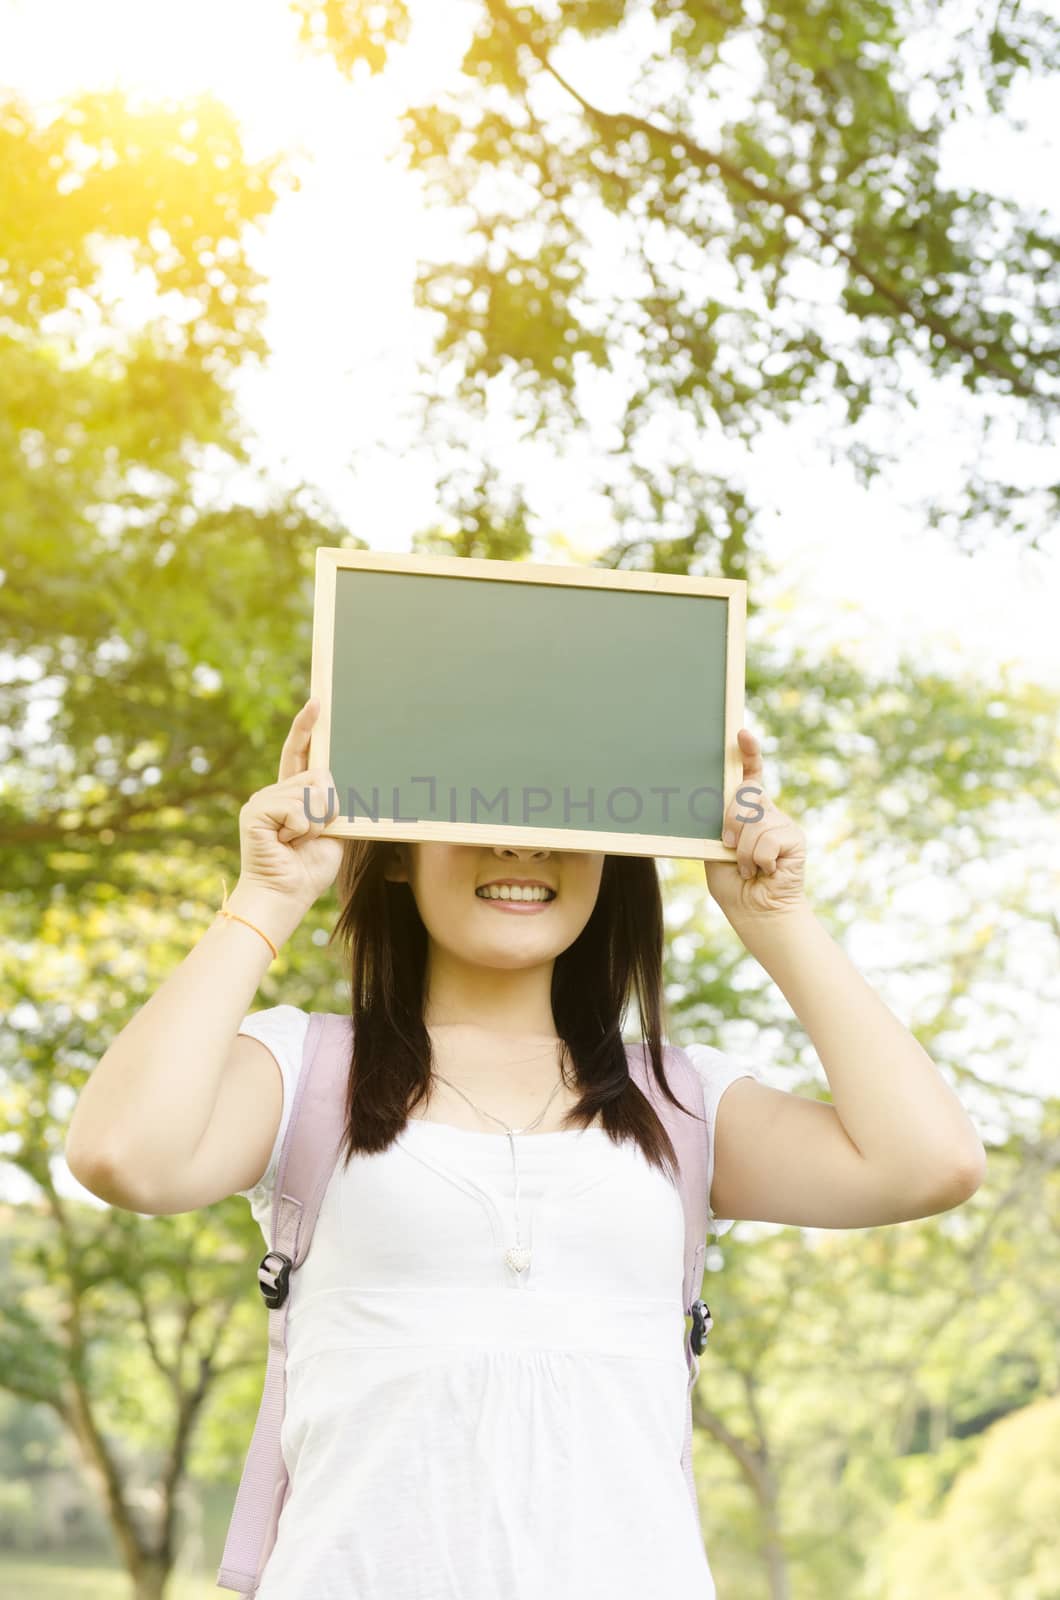 Young Asian college girl student standing on campus lawn, hands holding a blank chalkboard covering face and smiling.